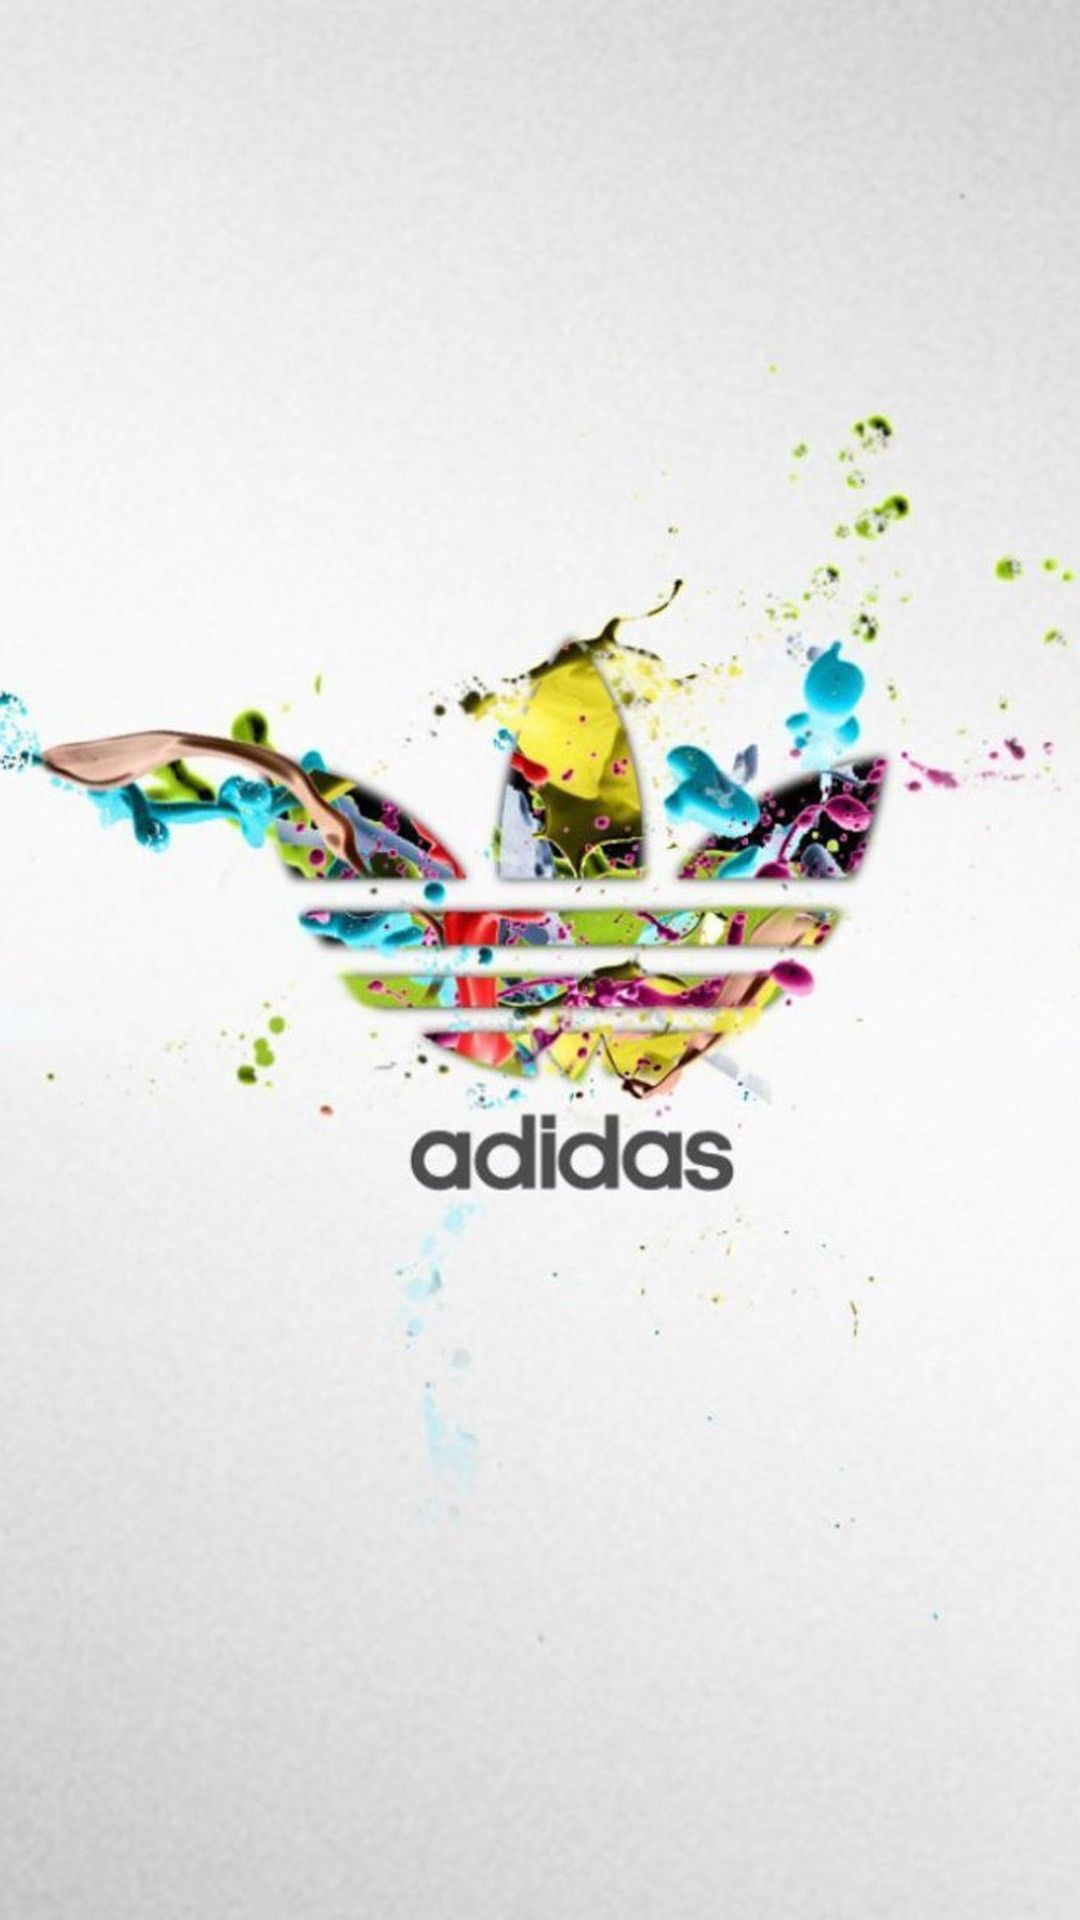 Adidas Wallpaper for mobile phone, tablet, desktop computer and other devices HD and 4K wallpa. Adidas iphone wallpaper, Adidas wallpaper, Adidas logo wallpaper